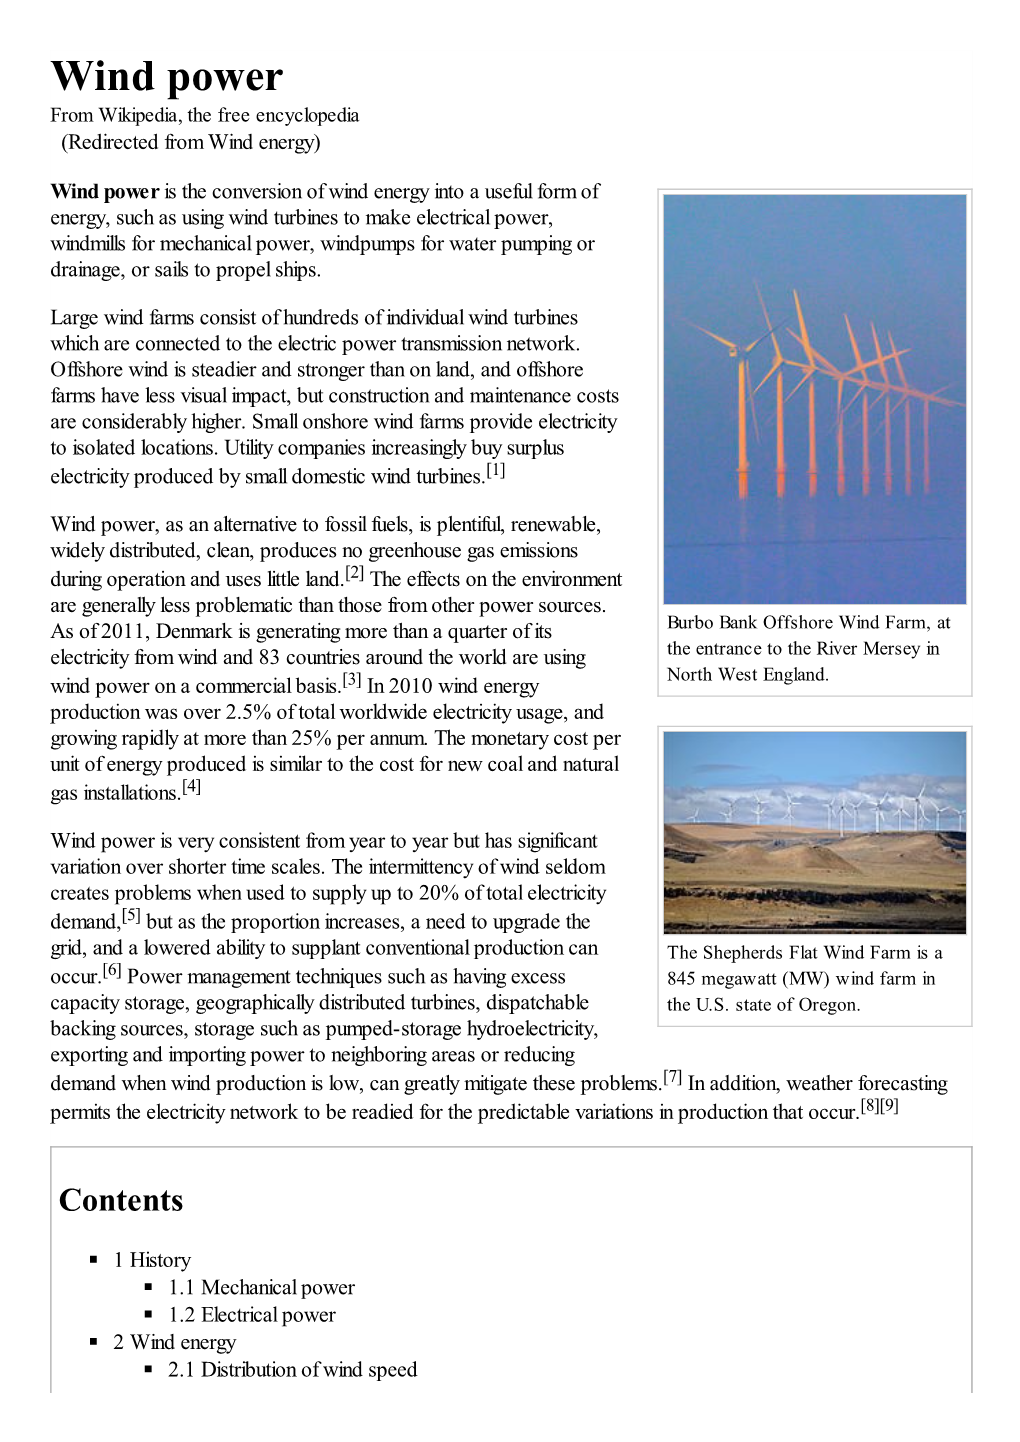 Wind Power from Wikipedia, the Free Encyclopedia (Redirected from Wind Energy)